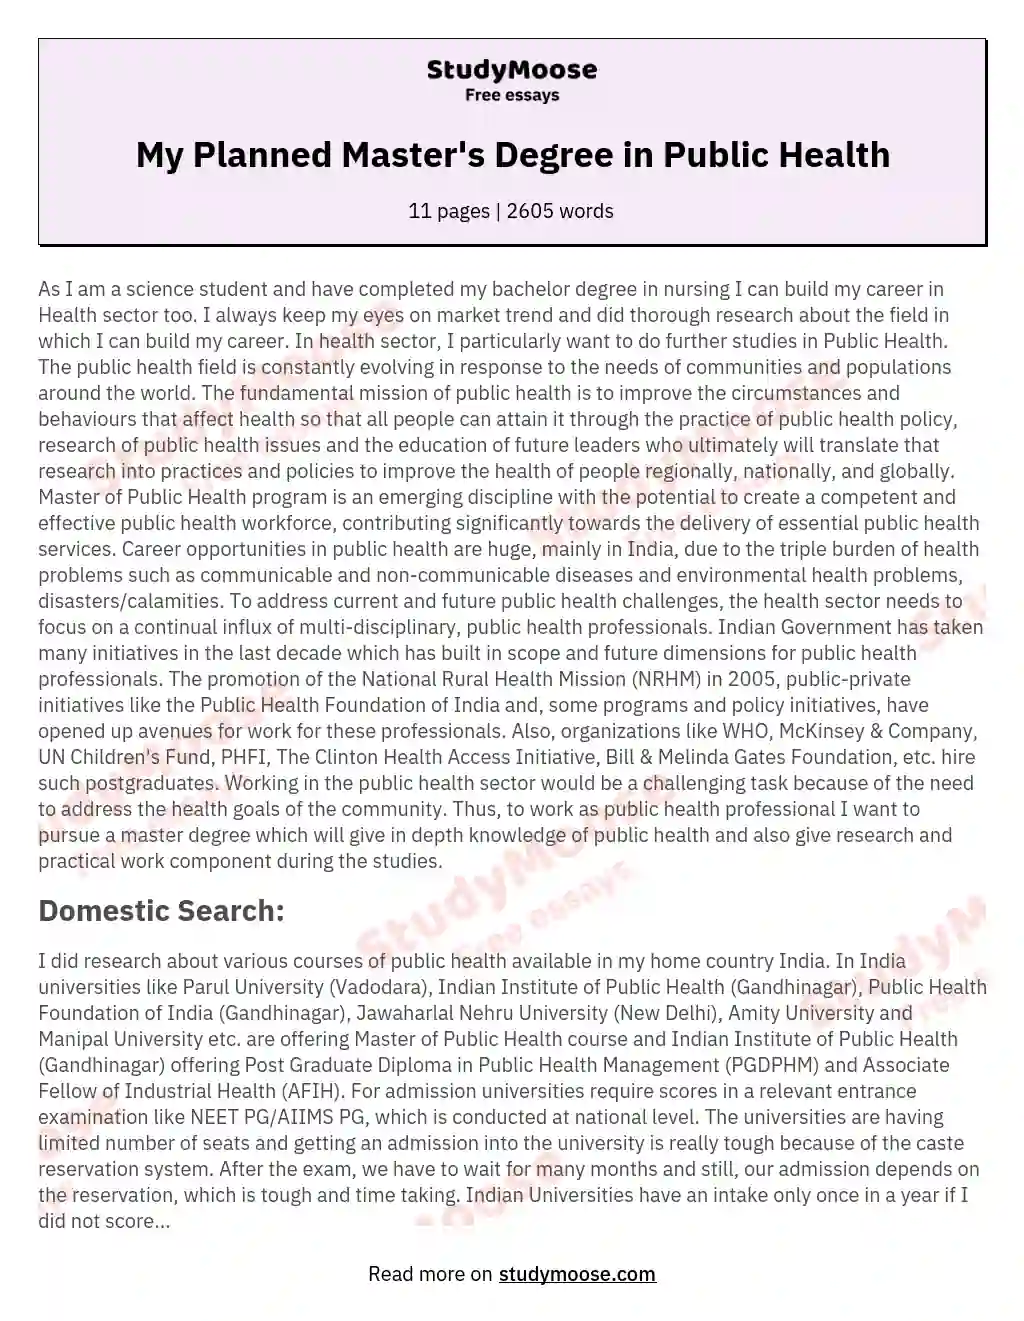 My Planned Master's Degree in Public Health essay